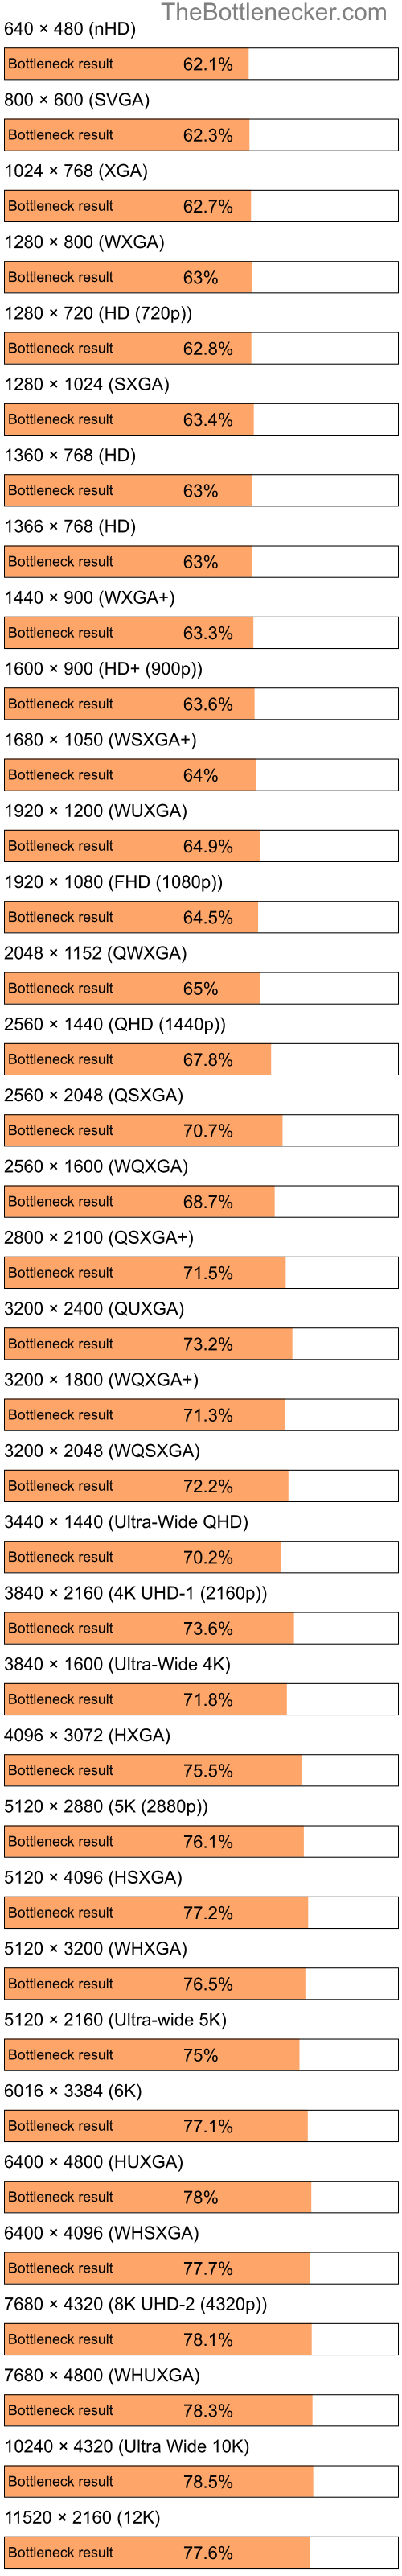 Bottleneck results by resolution for Intel Pentium 4 and Intel G33 in Processor Intense Tasks